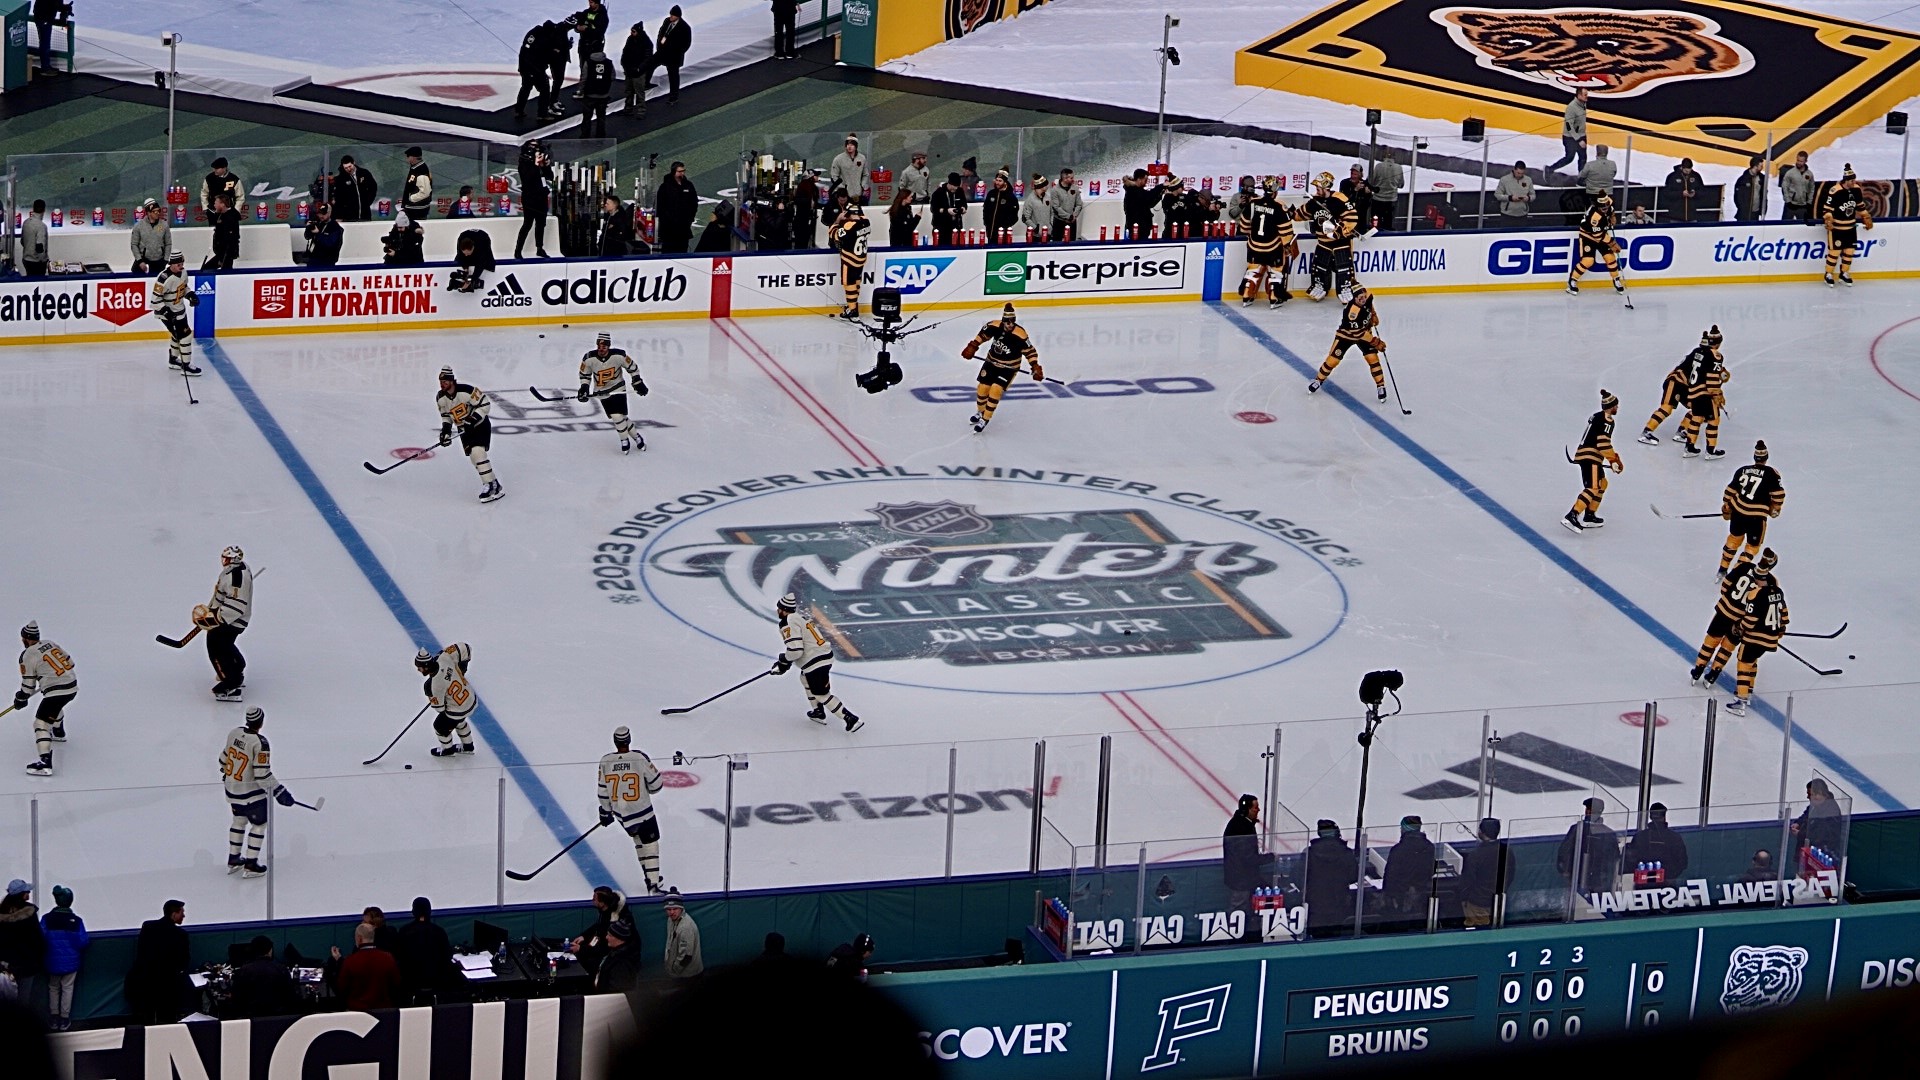 Black and gold flood Fenway as Bruins host Winter Classic